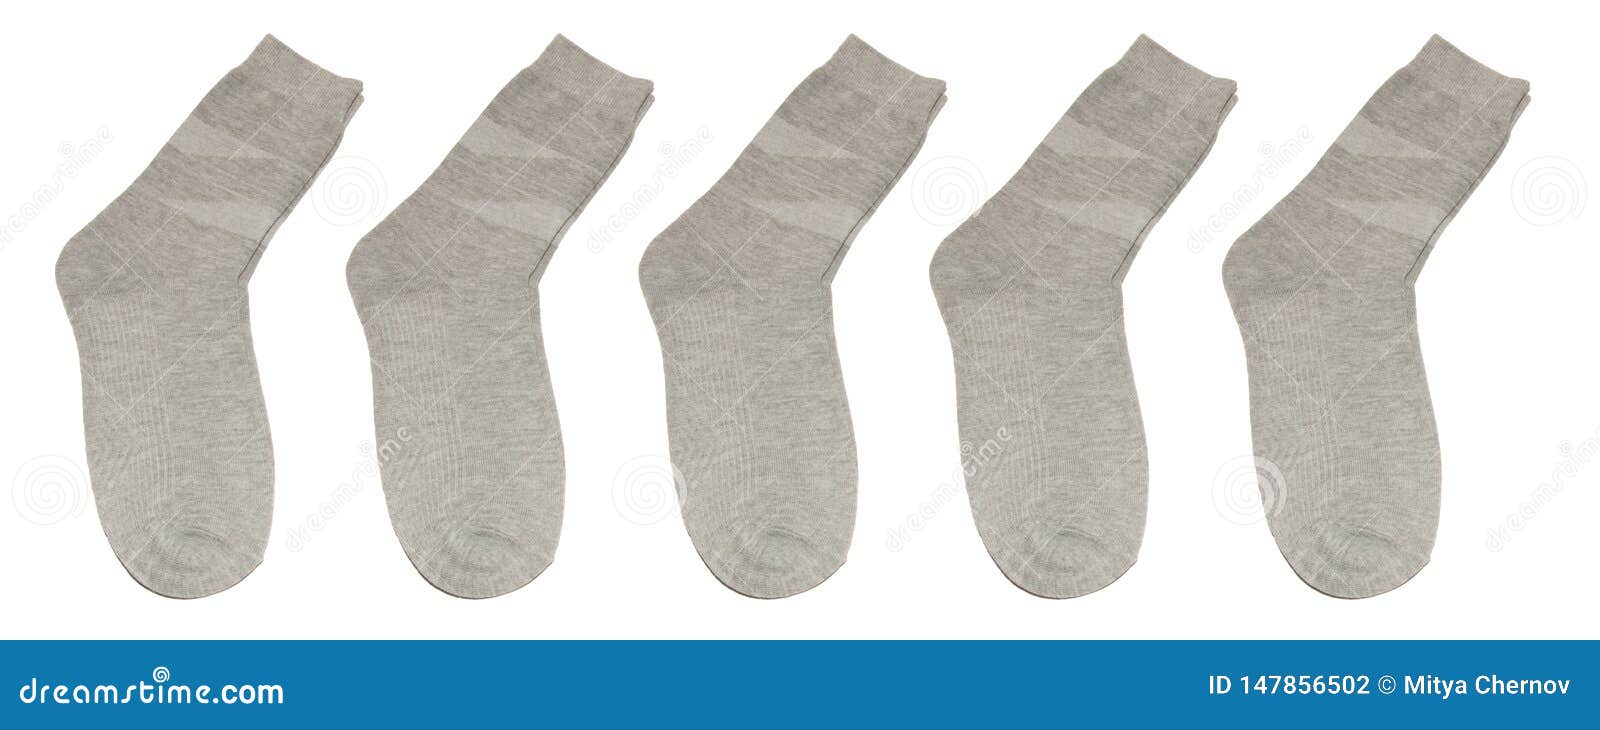 Five Pairs of Gray Socks. in Isolation Stock Photo - Image of male ...